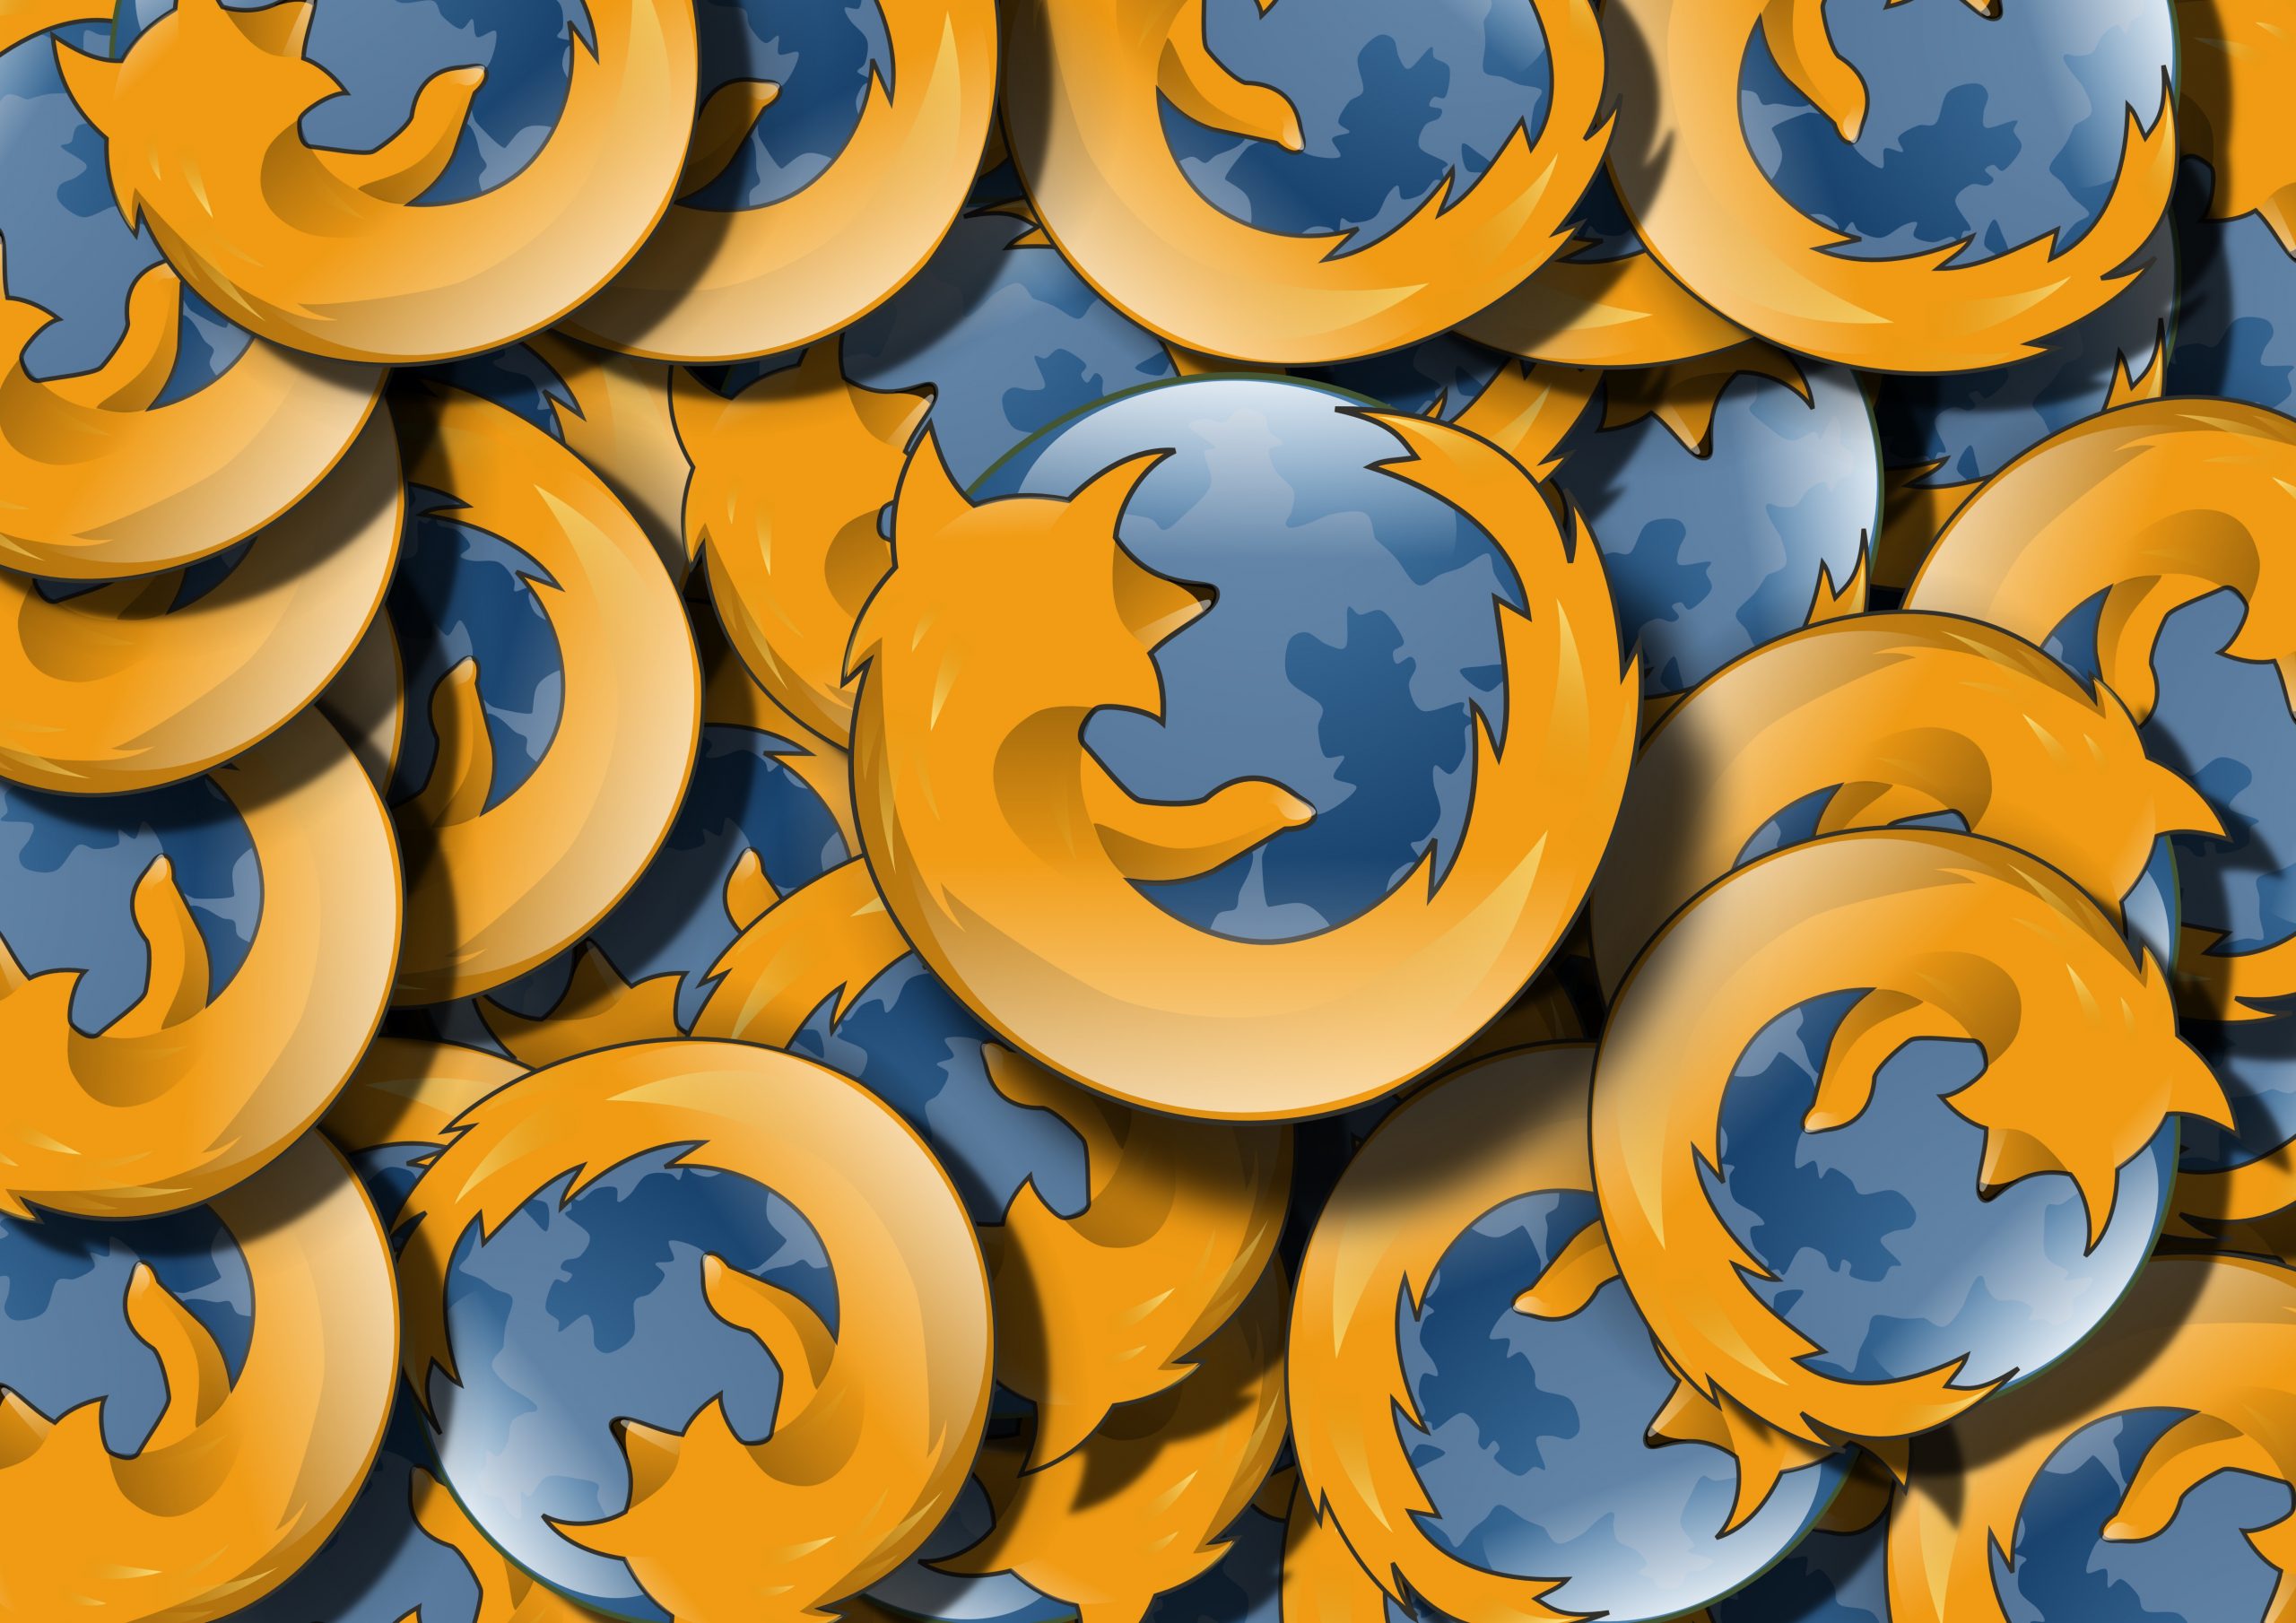 Stack of Firefox browser logo